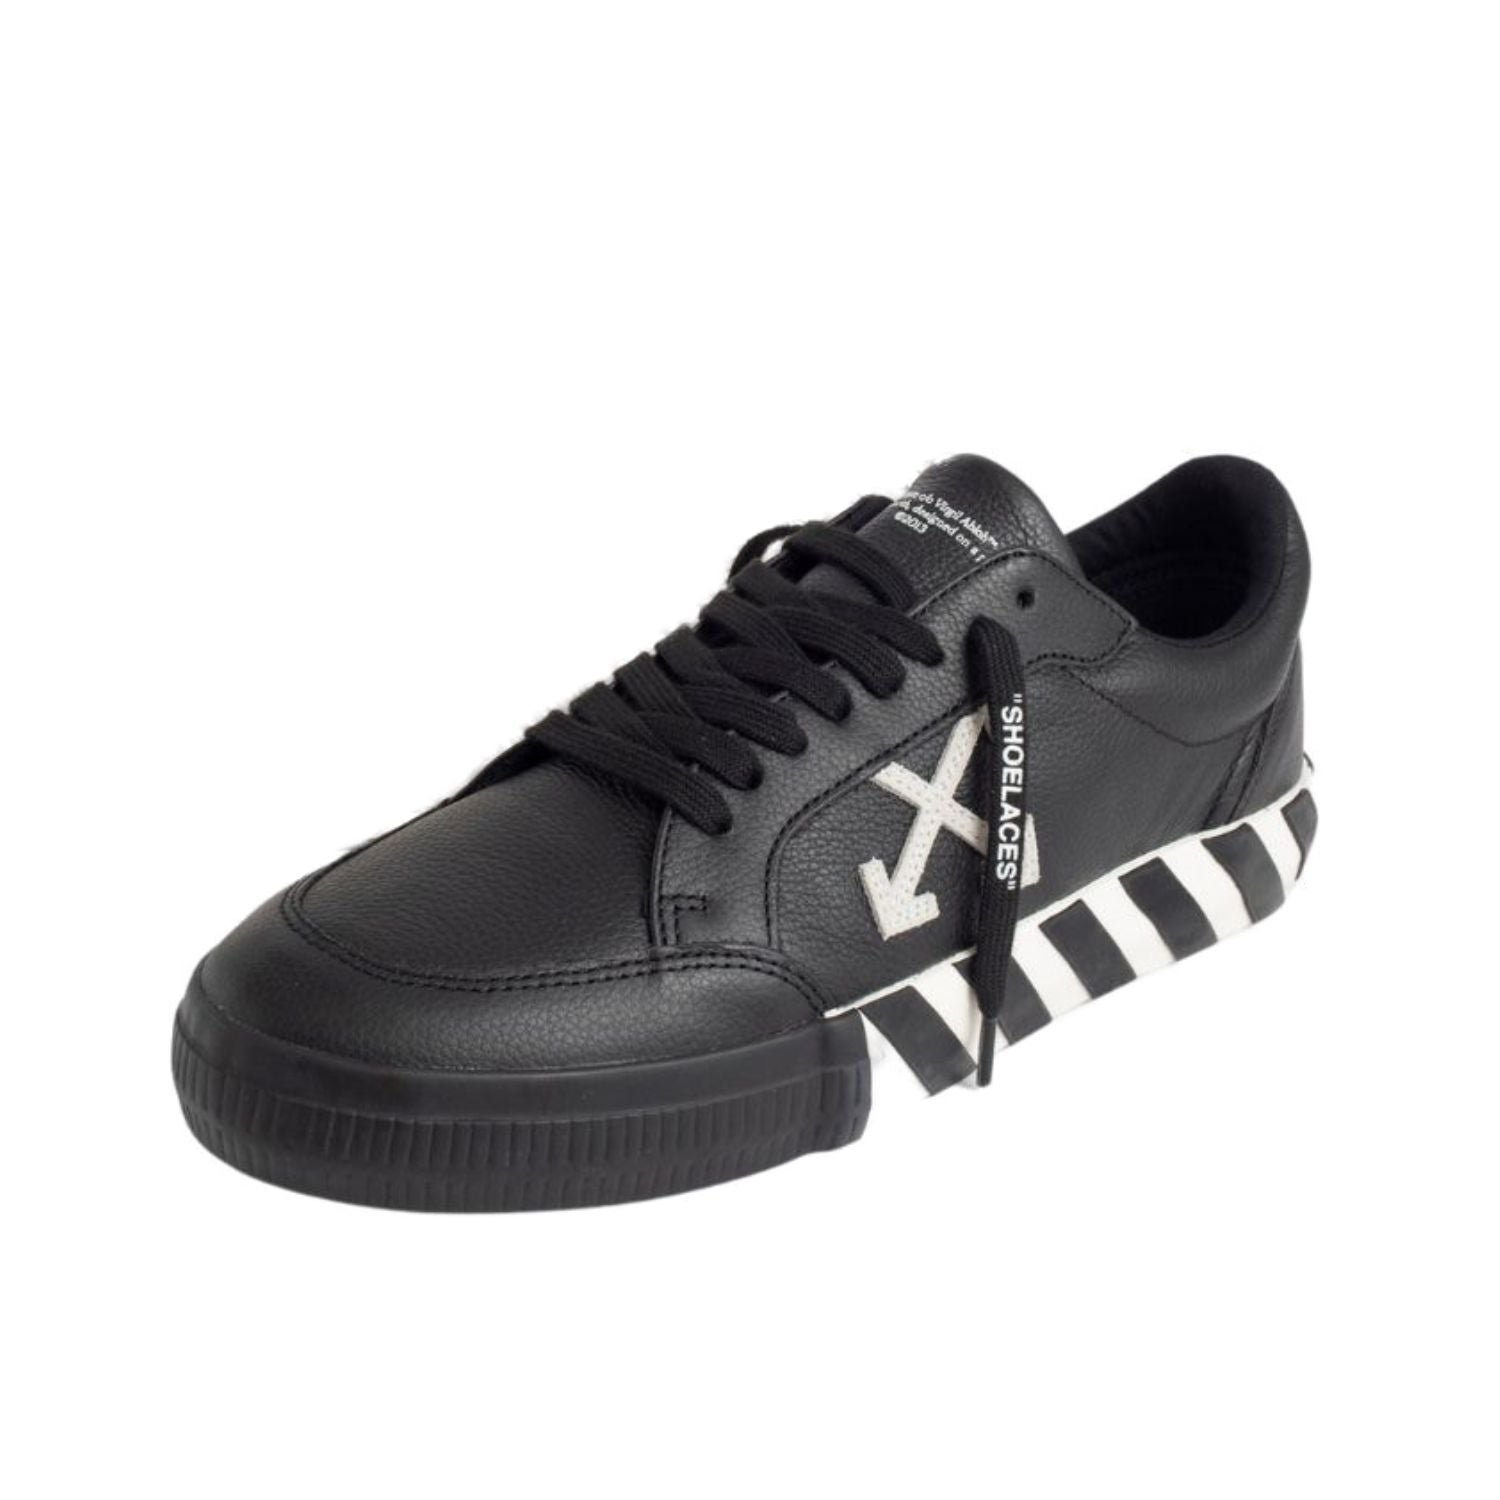 Off-white Low Vulcanized Calf Leather Mens Style : Omia085c99lea0011